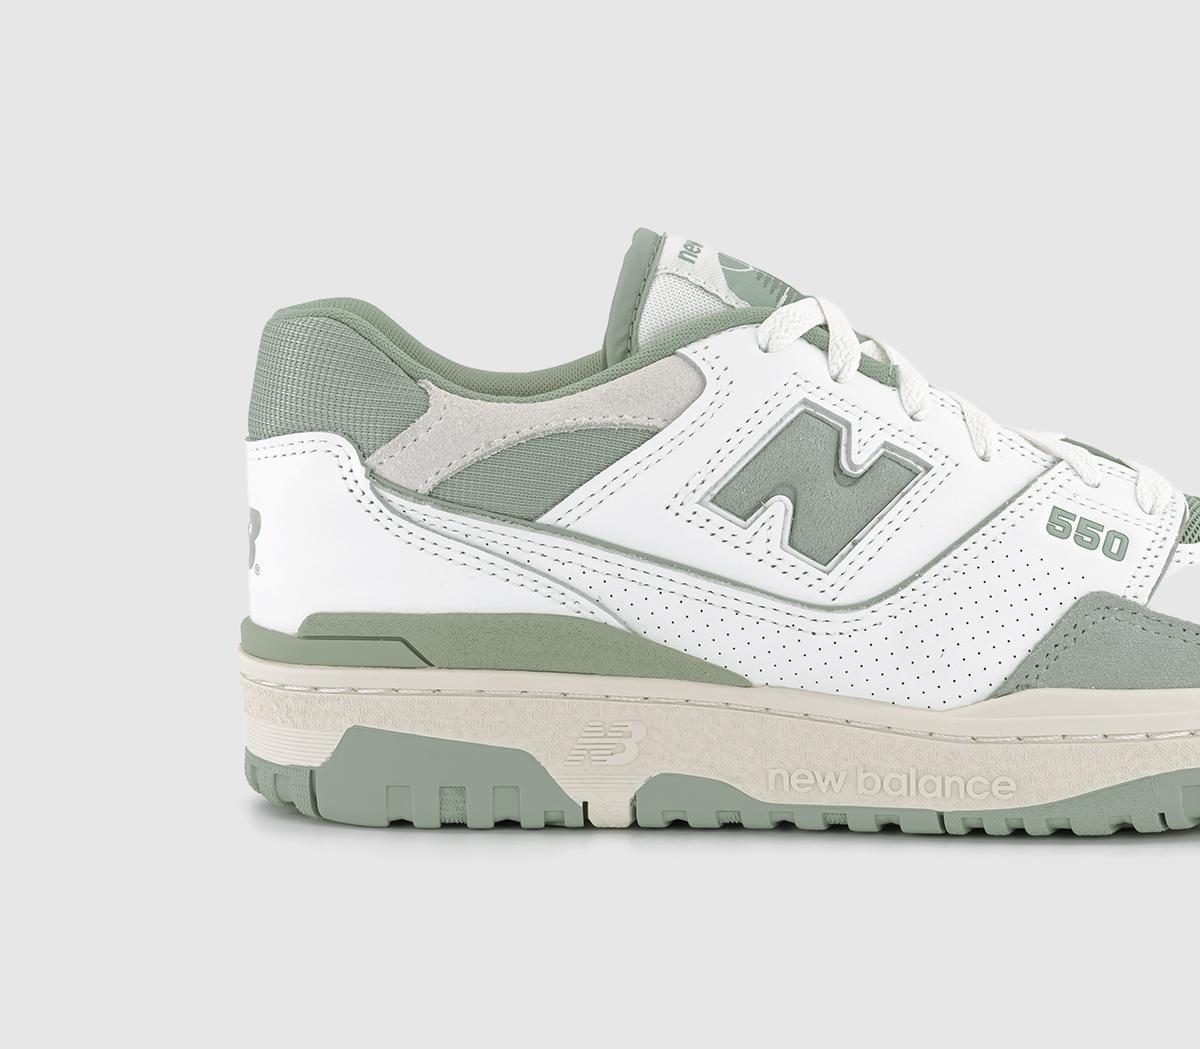 New Balance BB550 Trainers Sage Offwhite - Men's Trainers